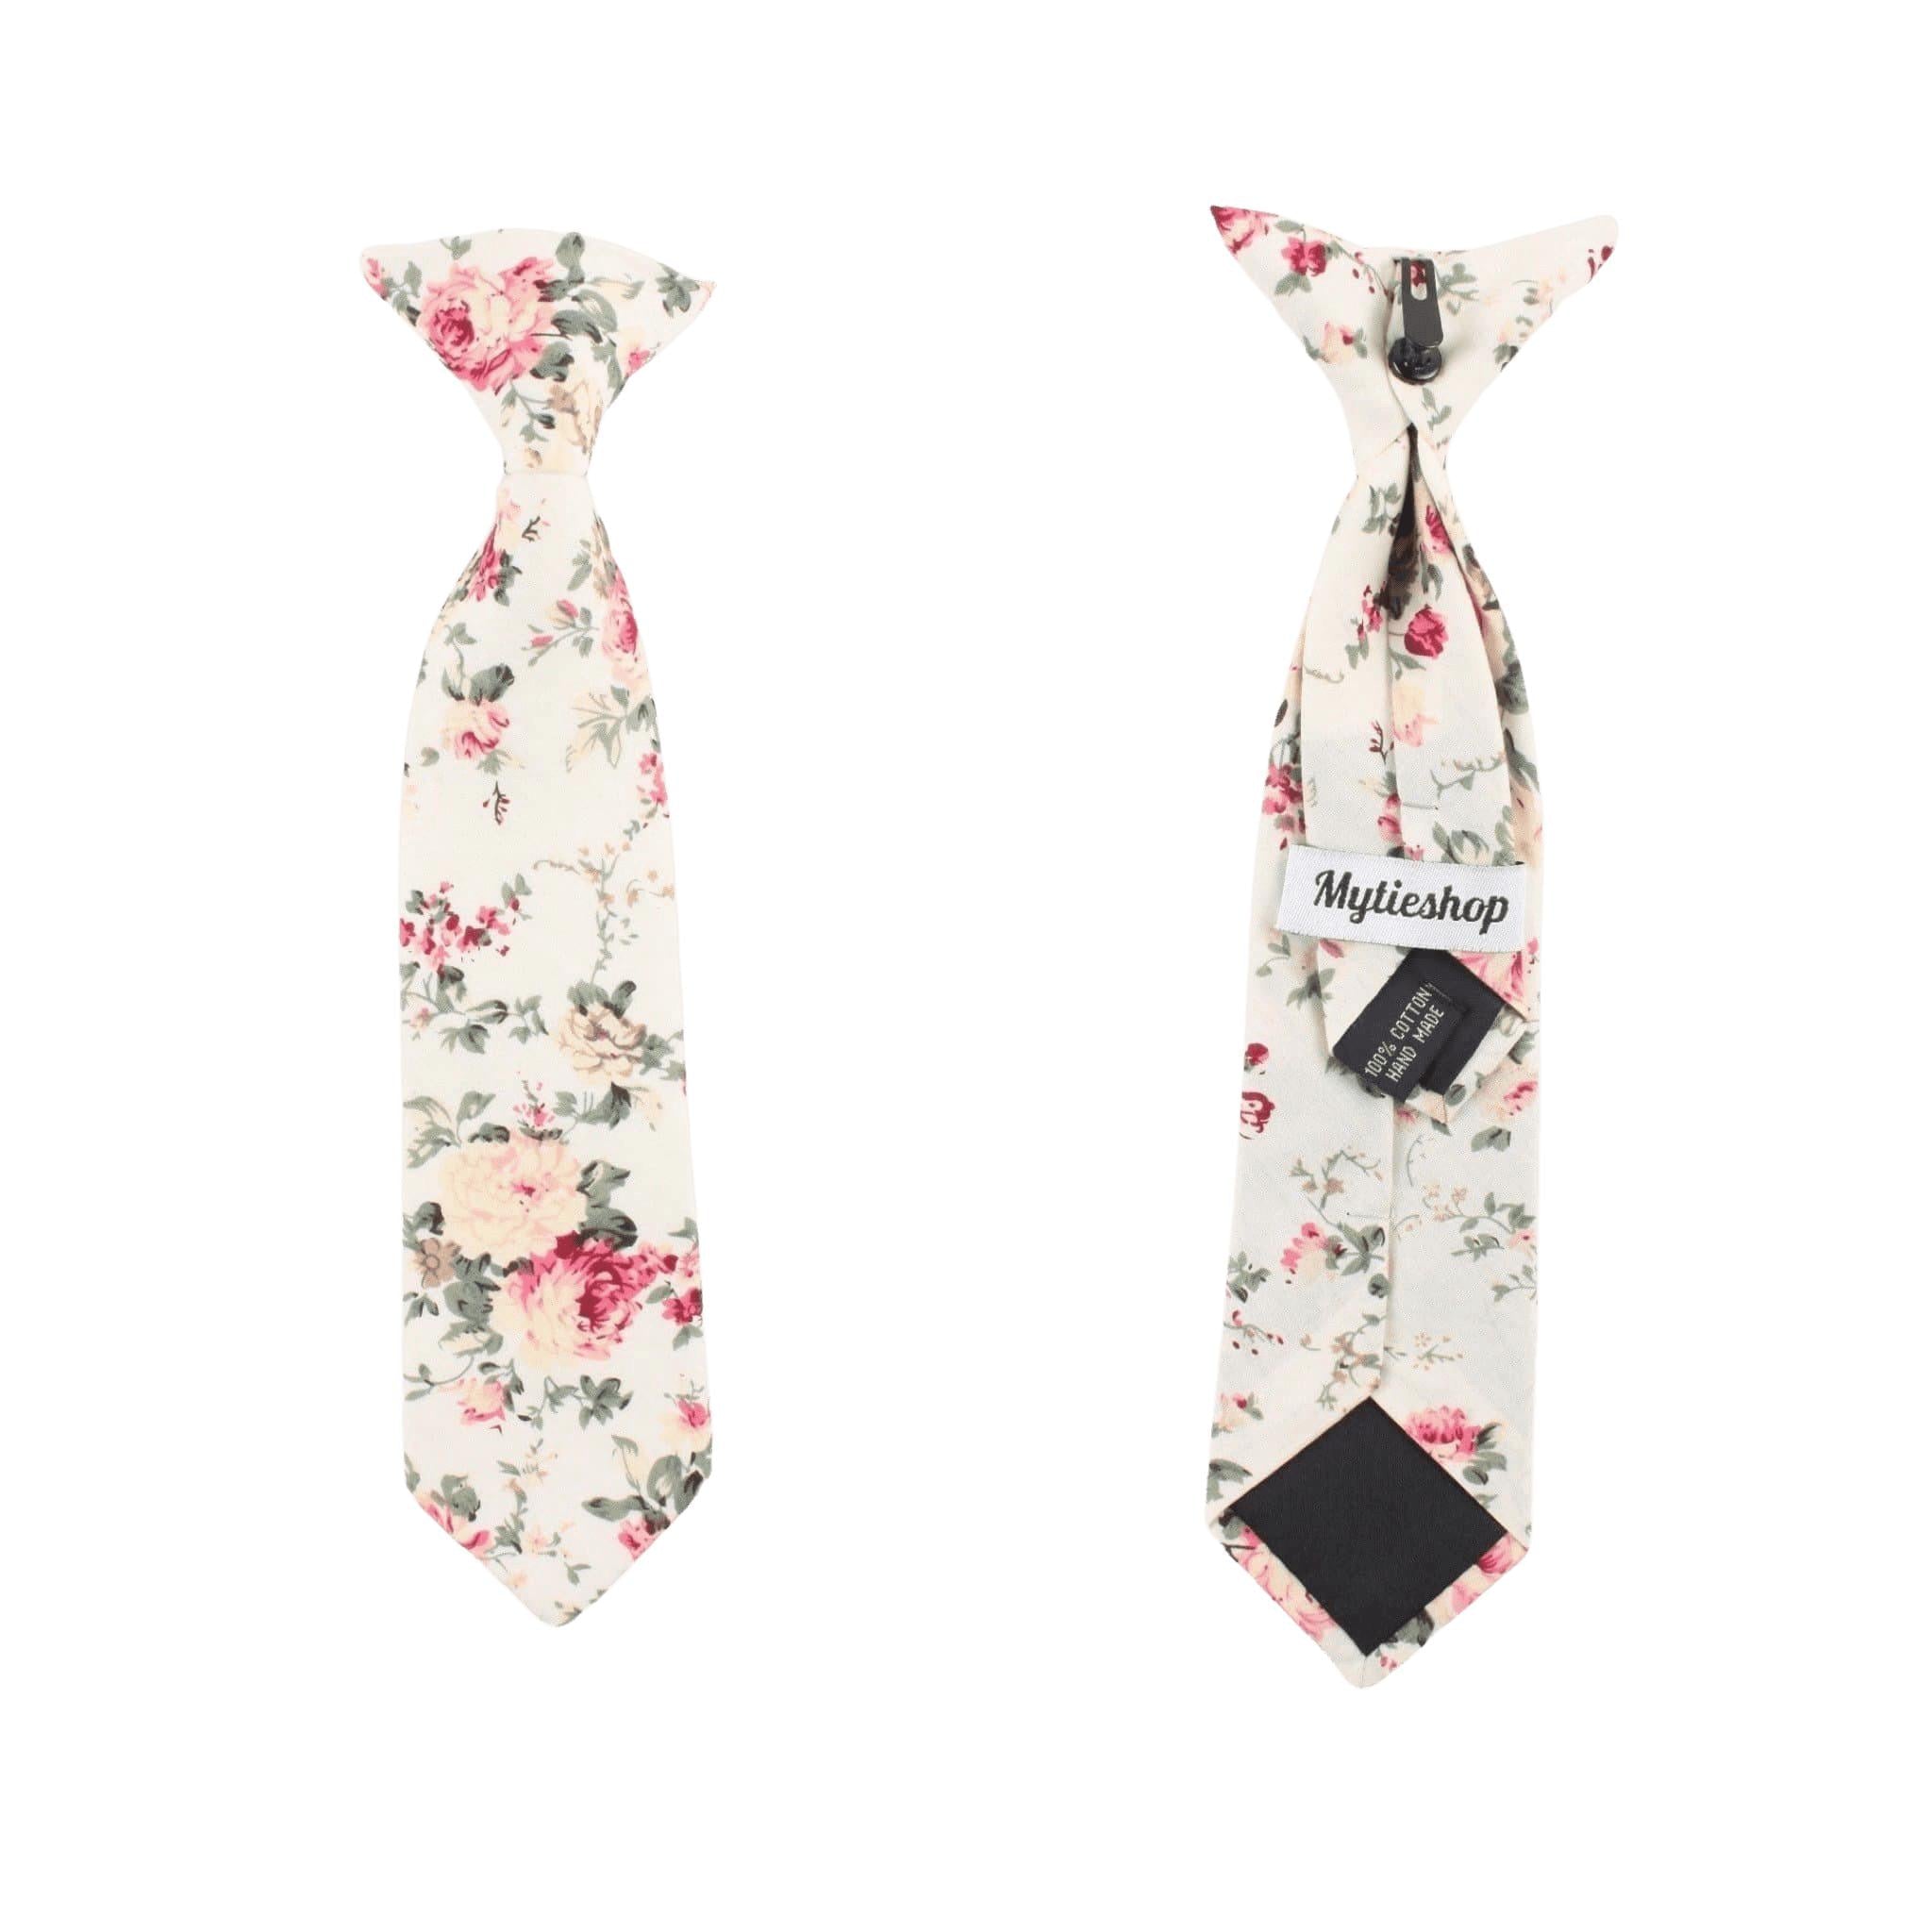 Cream Off White Boys and Toddlers Floral Skinny Tie 2.36” EMMETT MYTIESHOP-Cream Off White Boys and Toddlers Floral Skinny Tie Material:Cotton Approx Size: 57&quot;(145cm) in the length ;2.36&quot;(6cm) in the width 3 sizes available Color: More cream than Offwhite Celebrate life&#39;s little moments with this floral tie for kids. Mytiehop&#39;s Emmett Cream Floral Skinny Clip on Ties are perfect for adding a touch of whimsy to any special occasion. Whether your little one is the ring bearer at a wedding or simpl